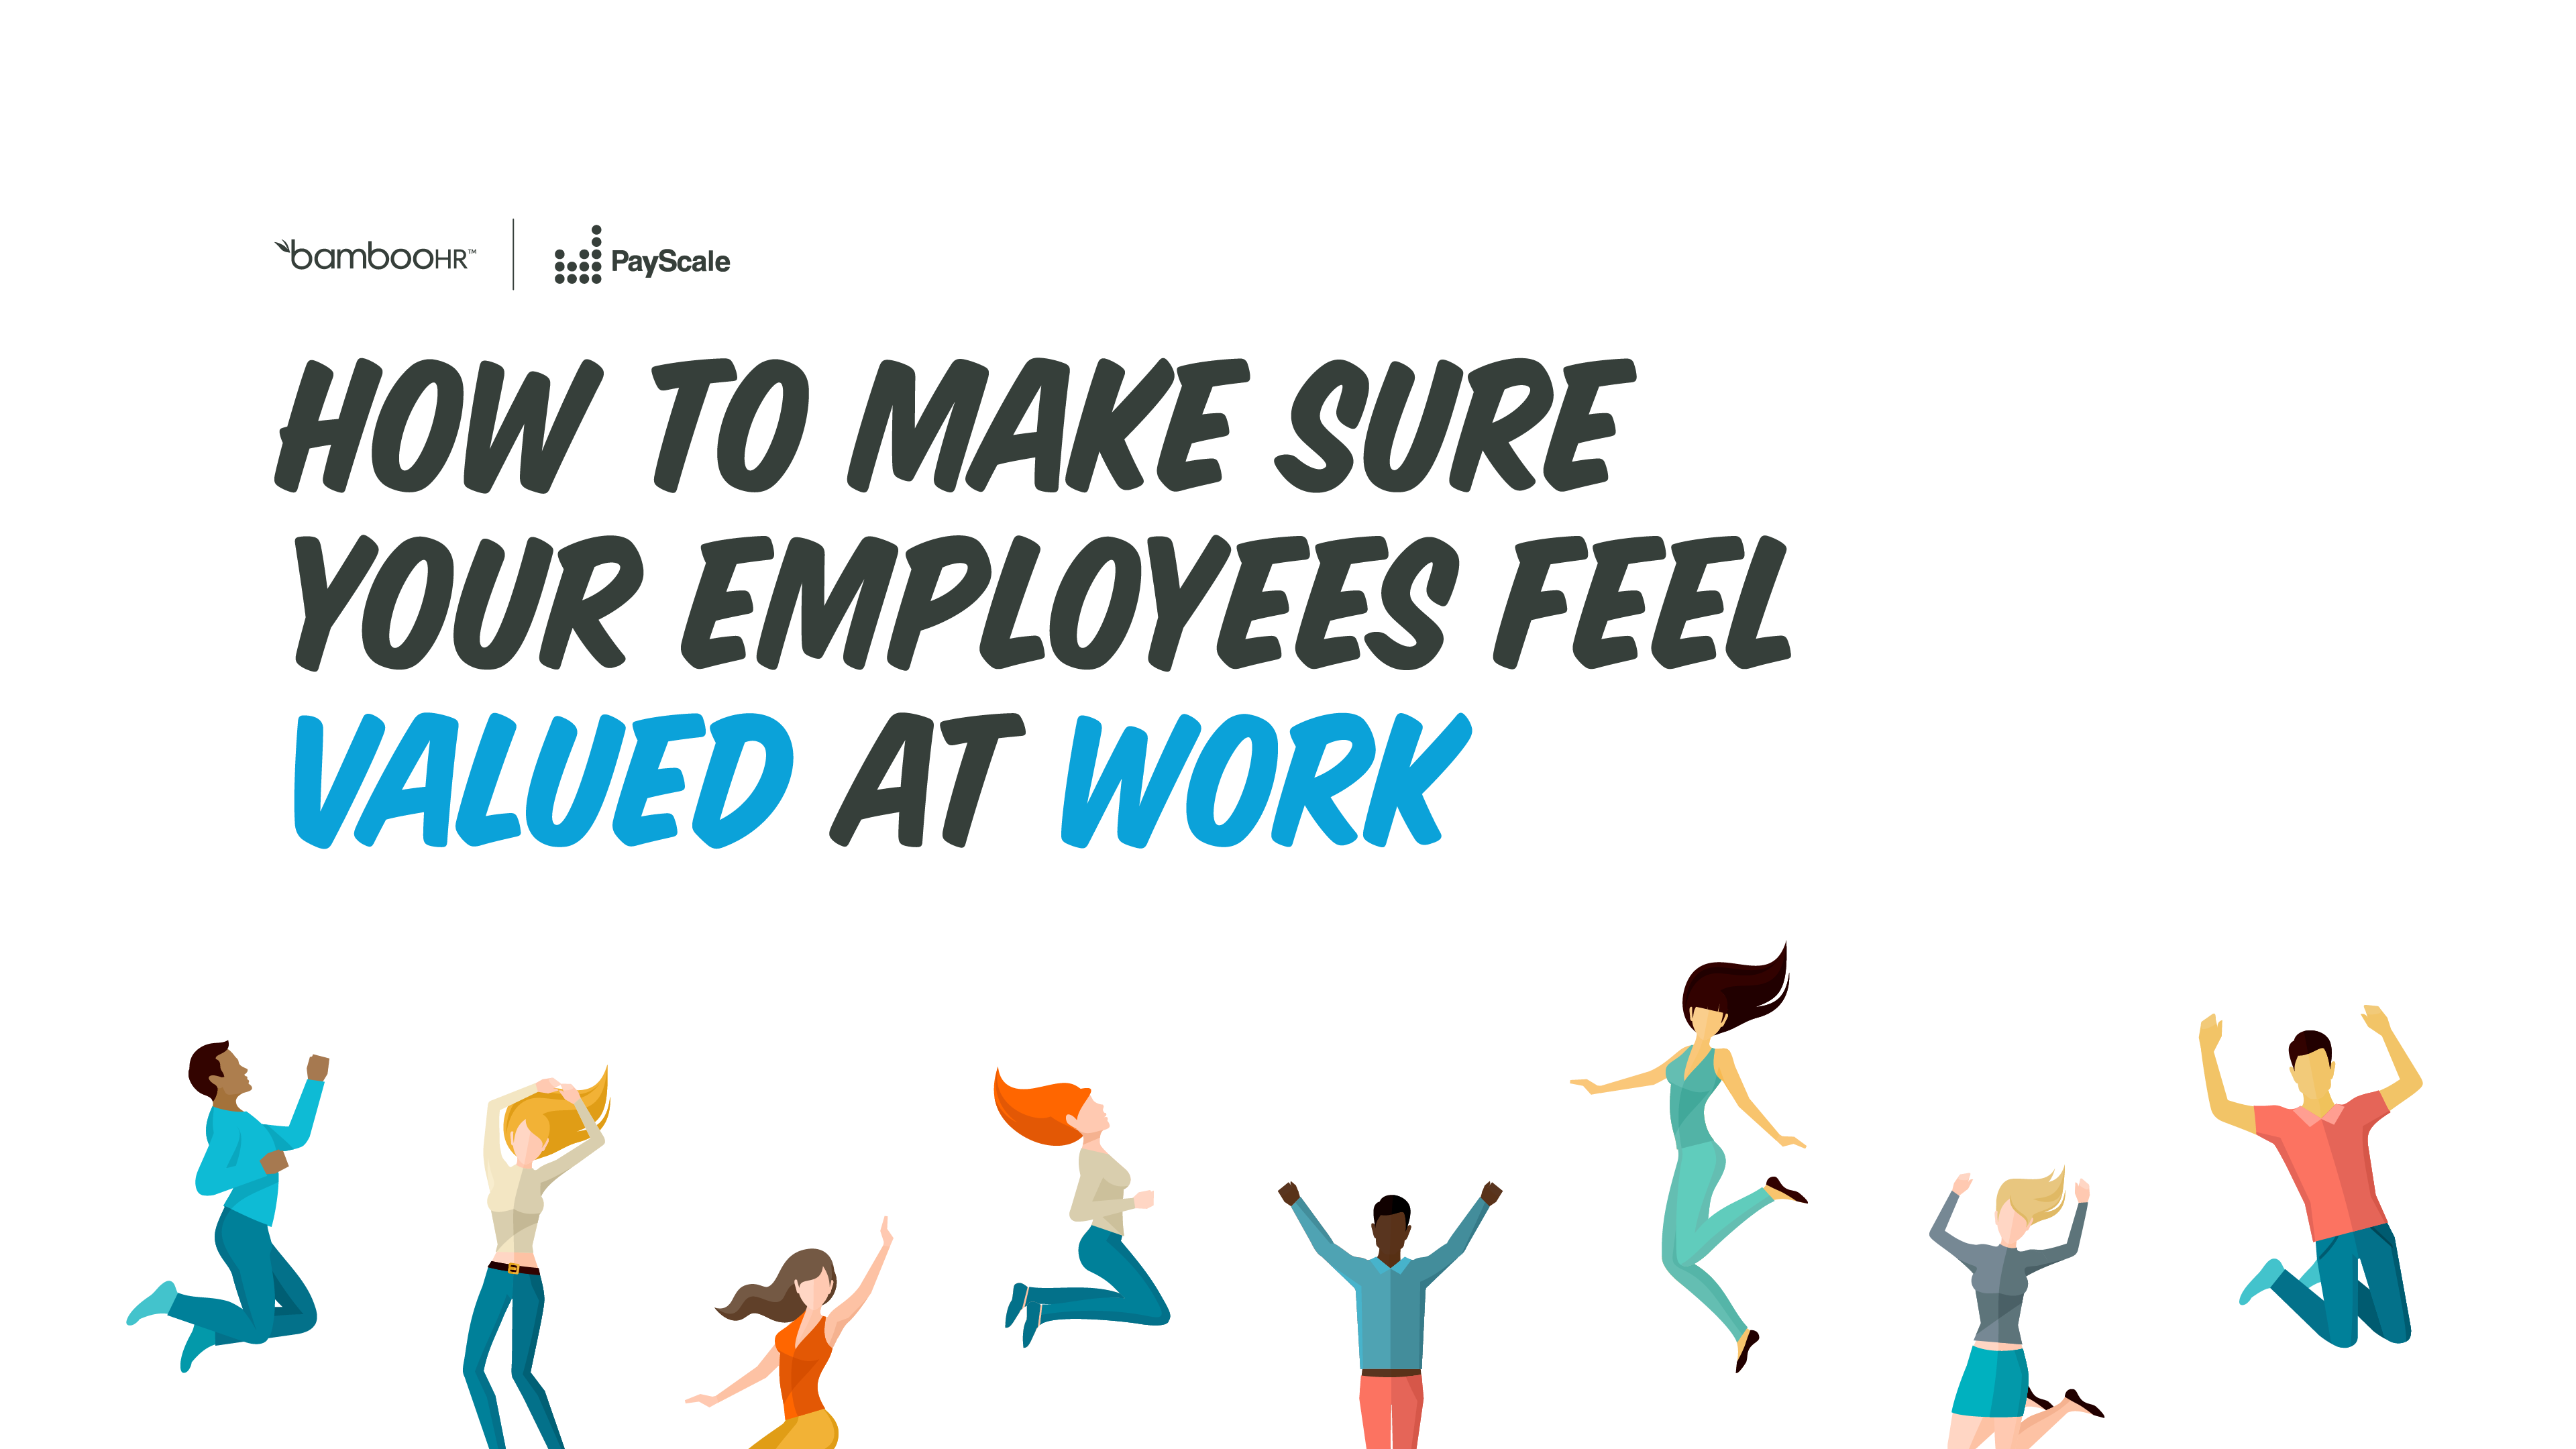 How to Make Sure Your Employees Feel Valued at Work